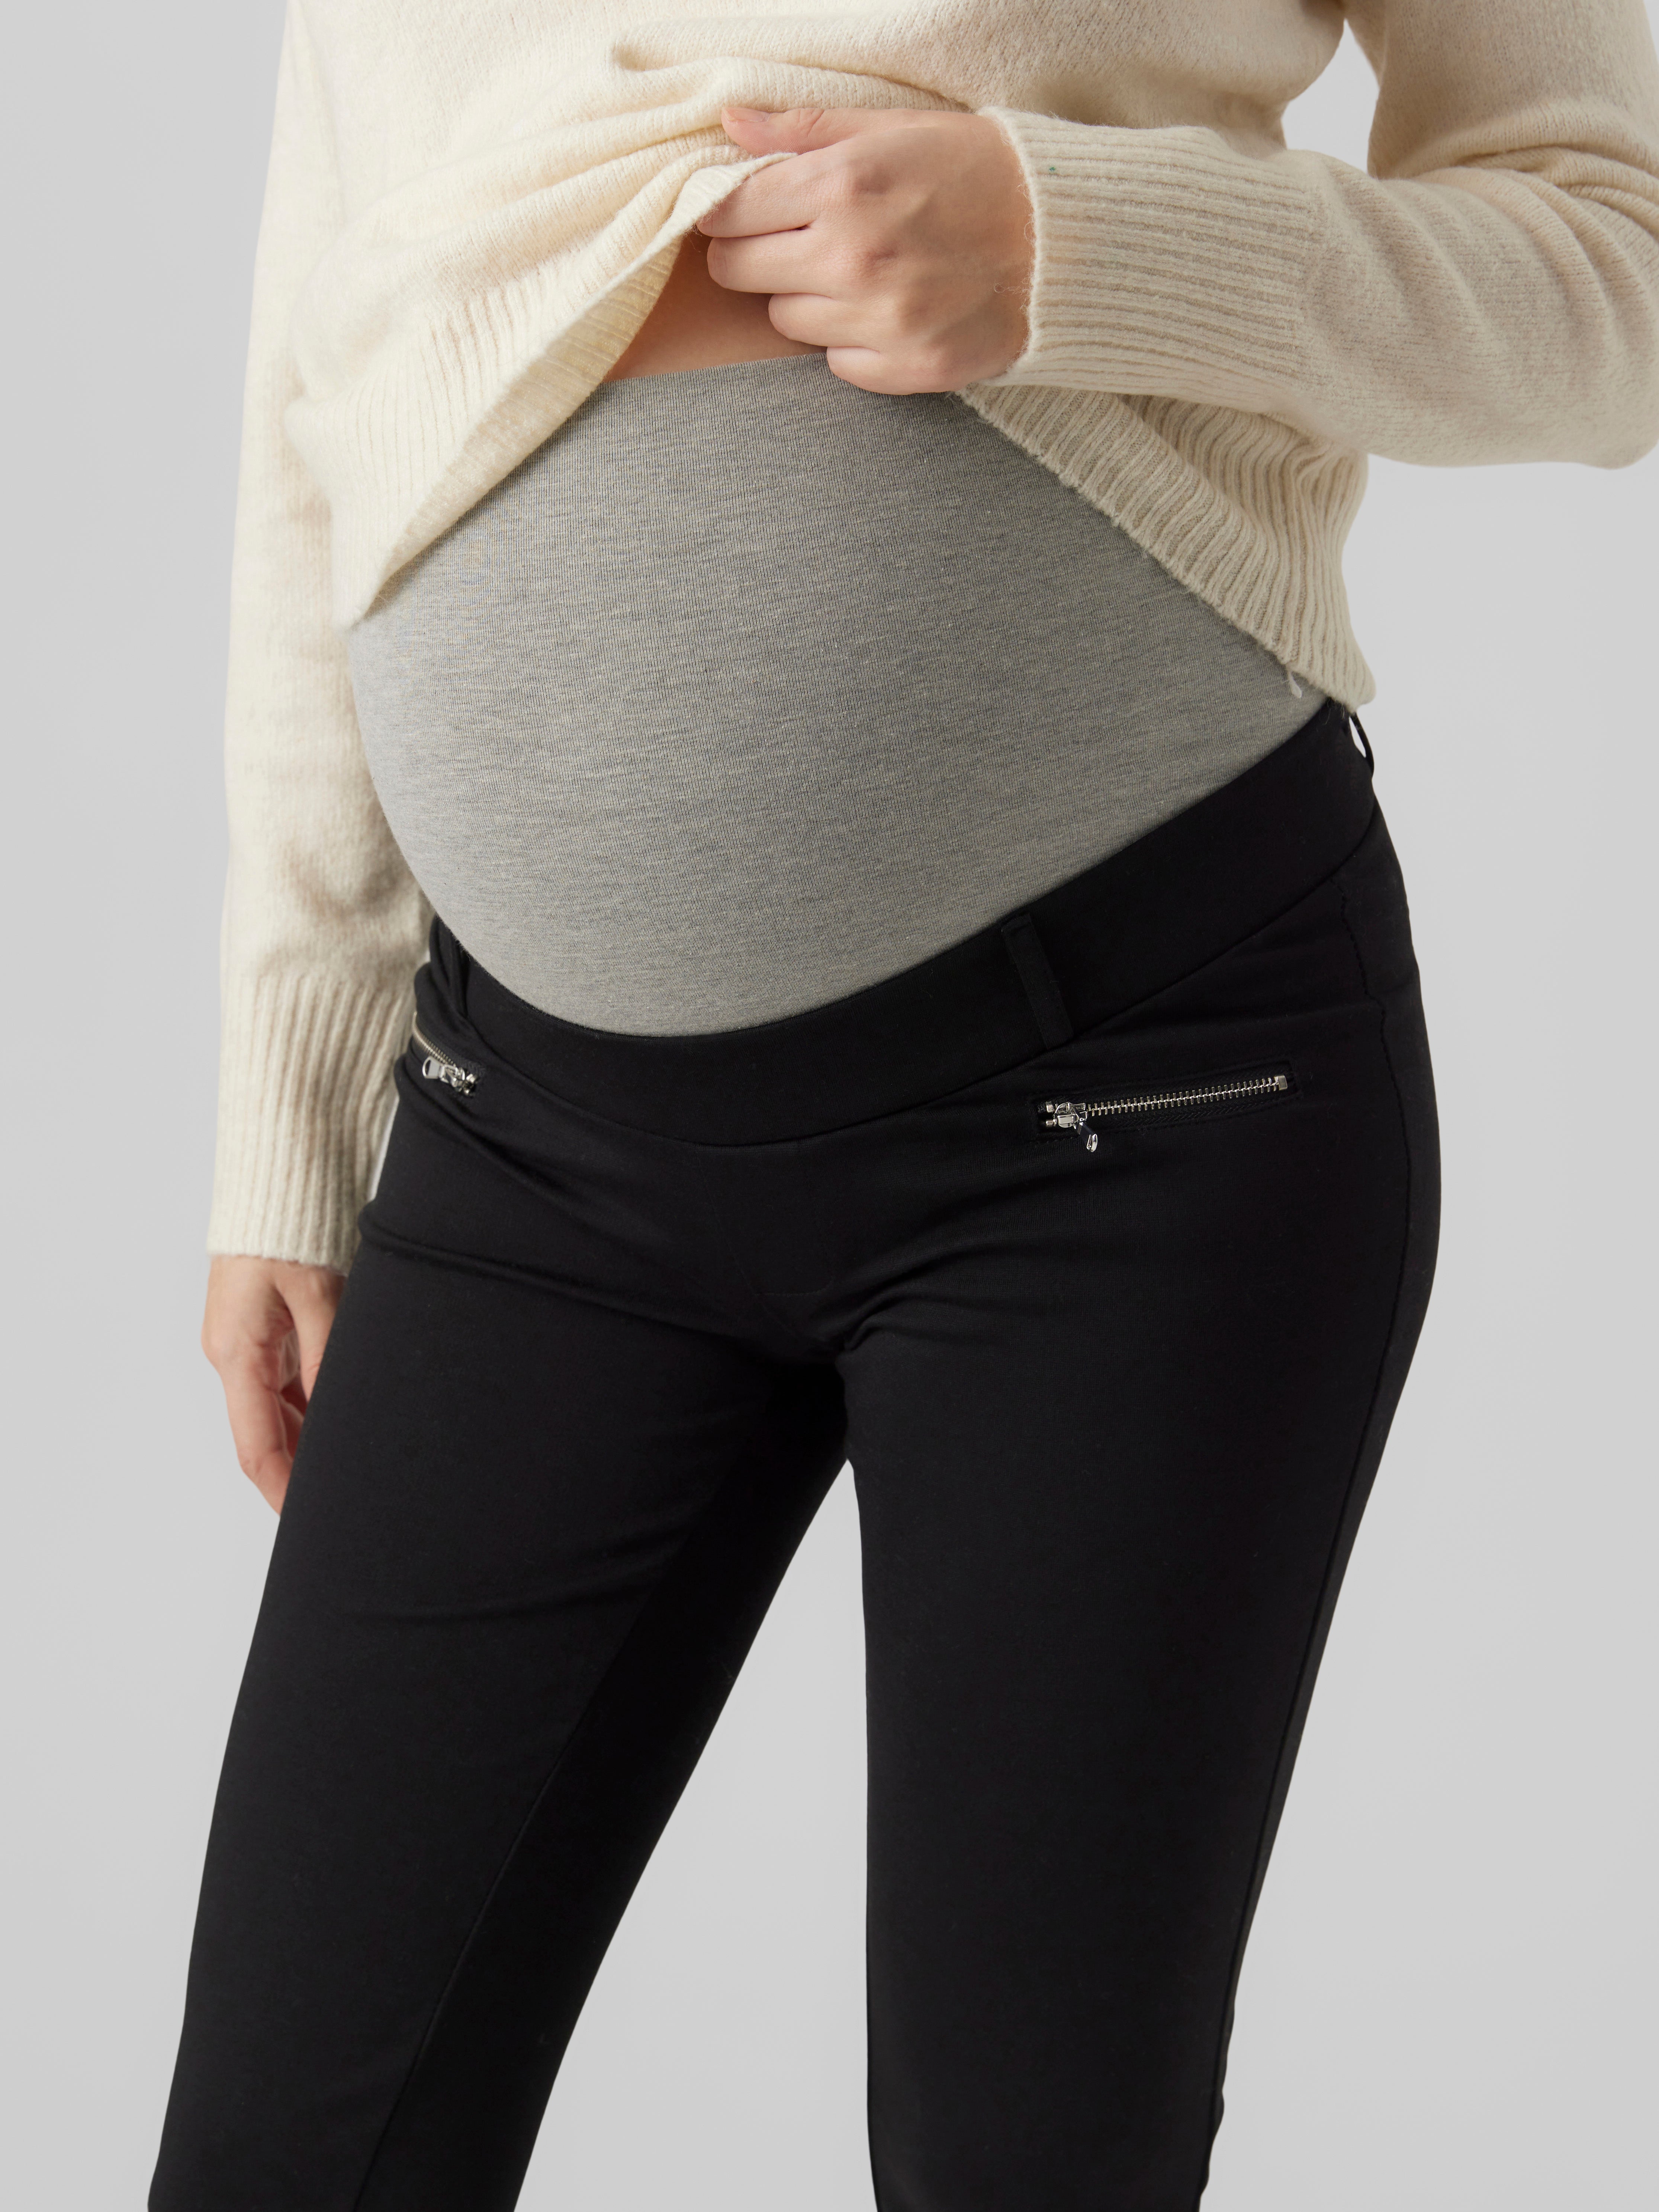 Over Belly Maternity Trousers! | Maternity trousers, Clothes design,  Maternity